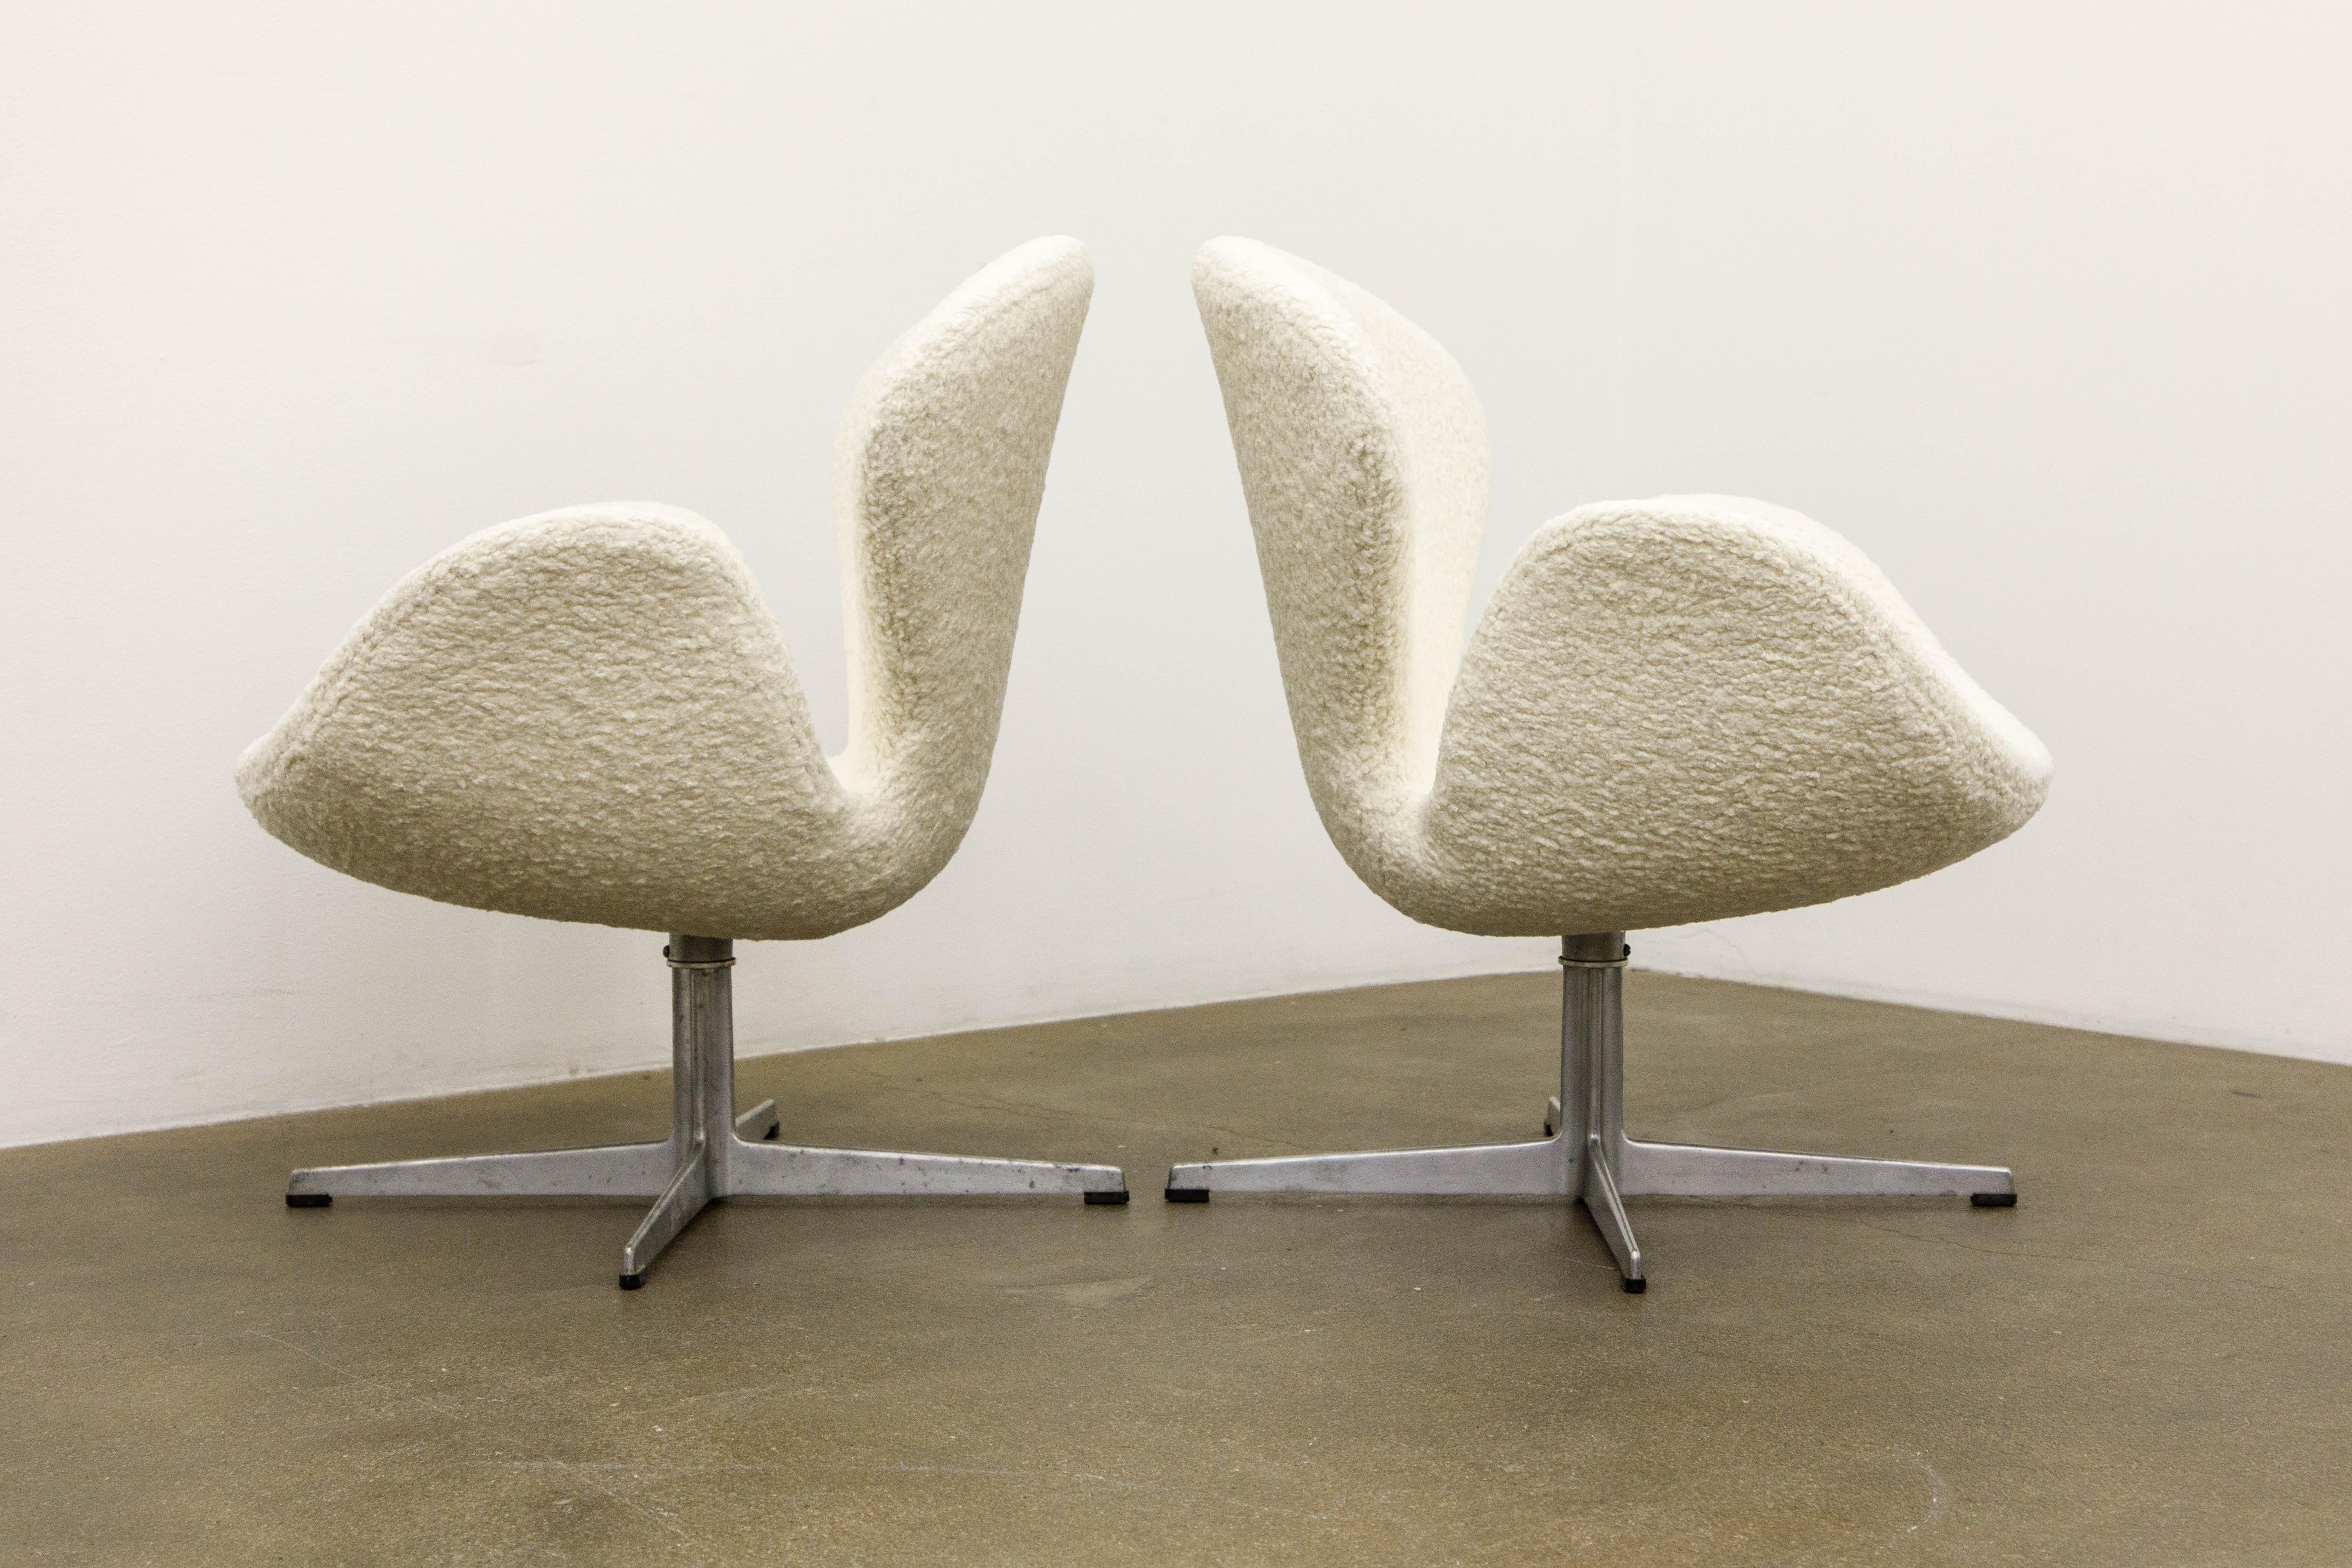 Aluminum 'Swan' Chairs in Bouclé by Arne Jacobsen for Fritz Hansen, Signed and Dated 1969